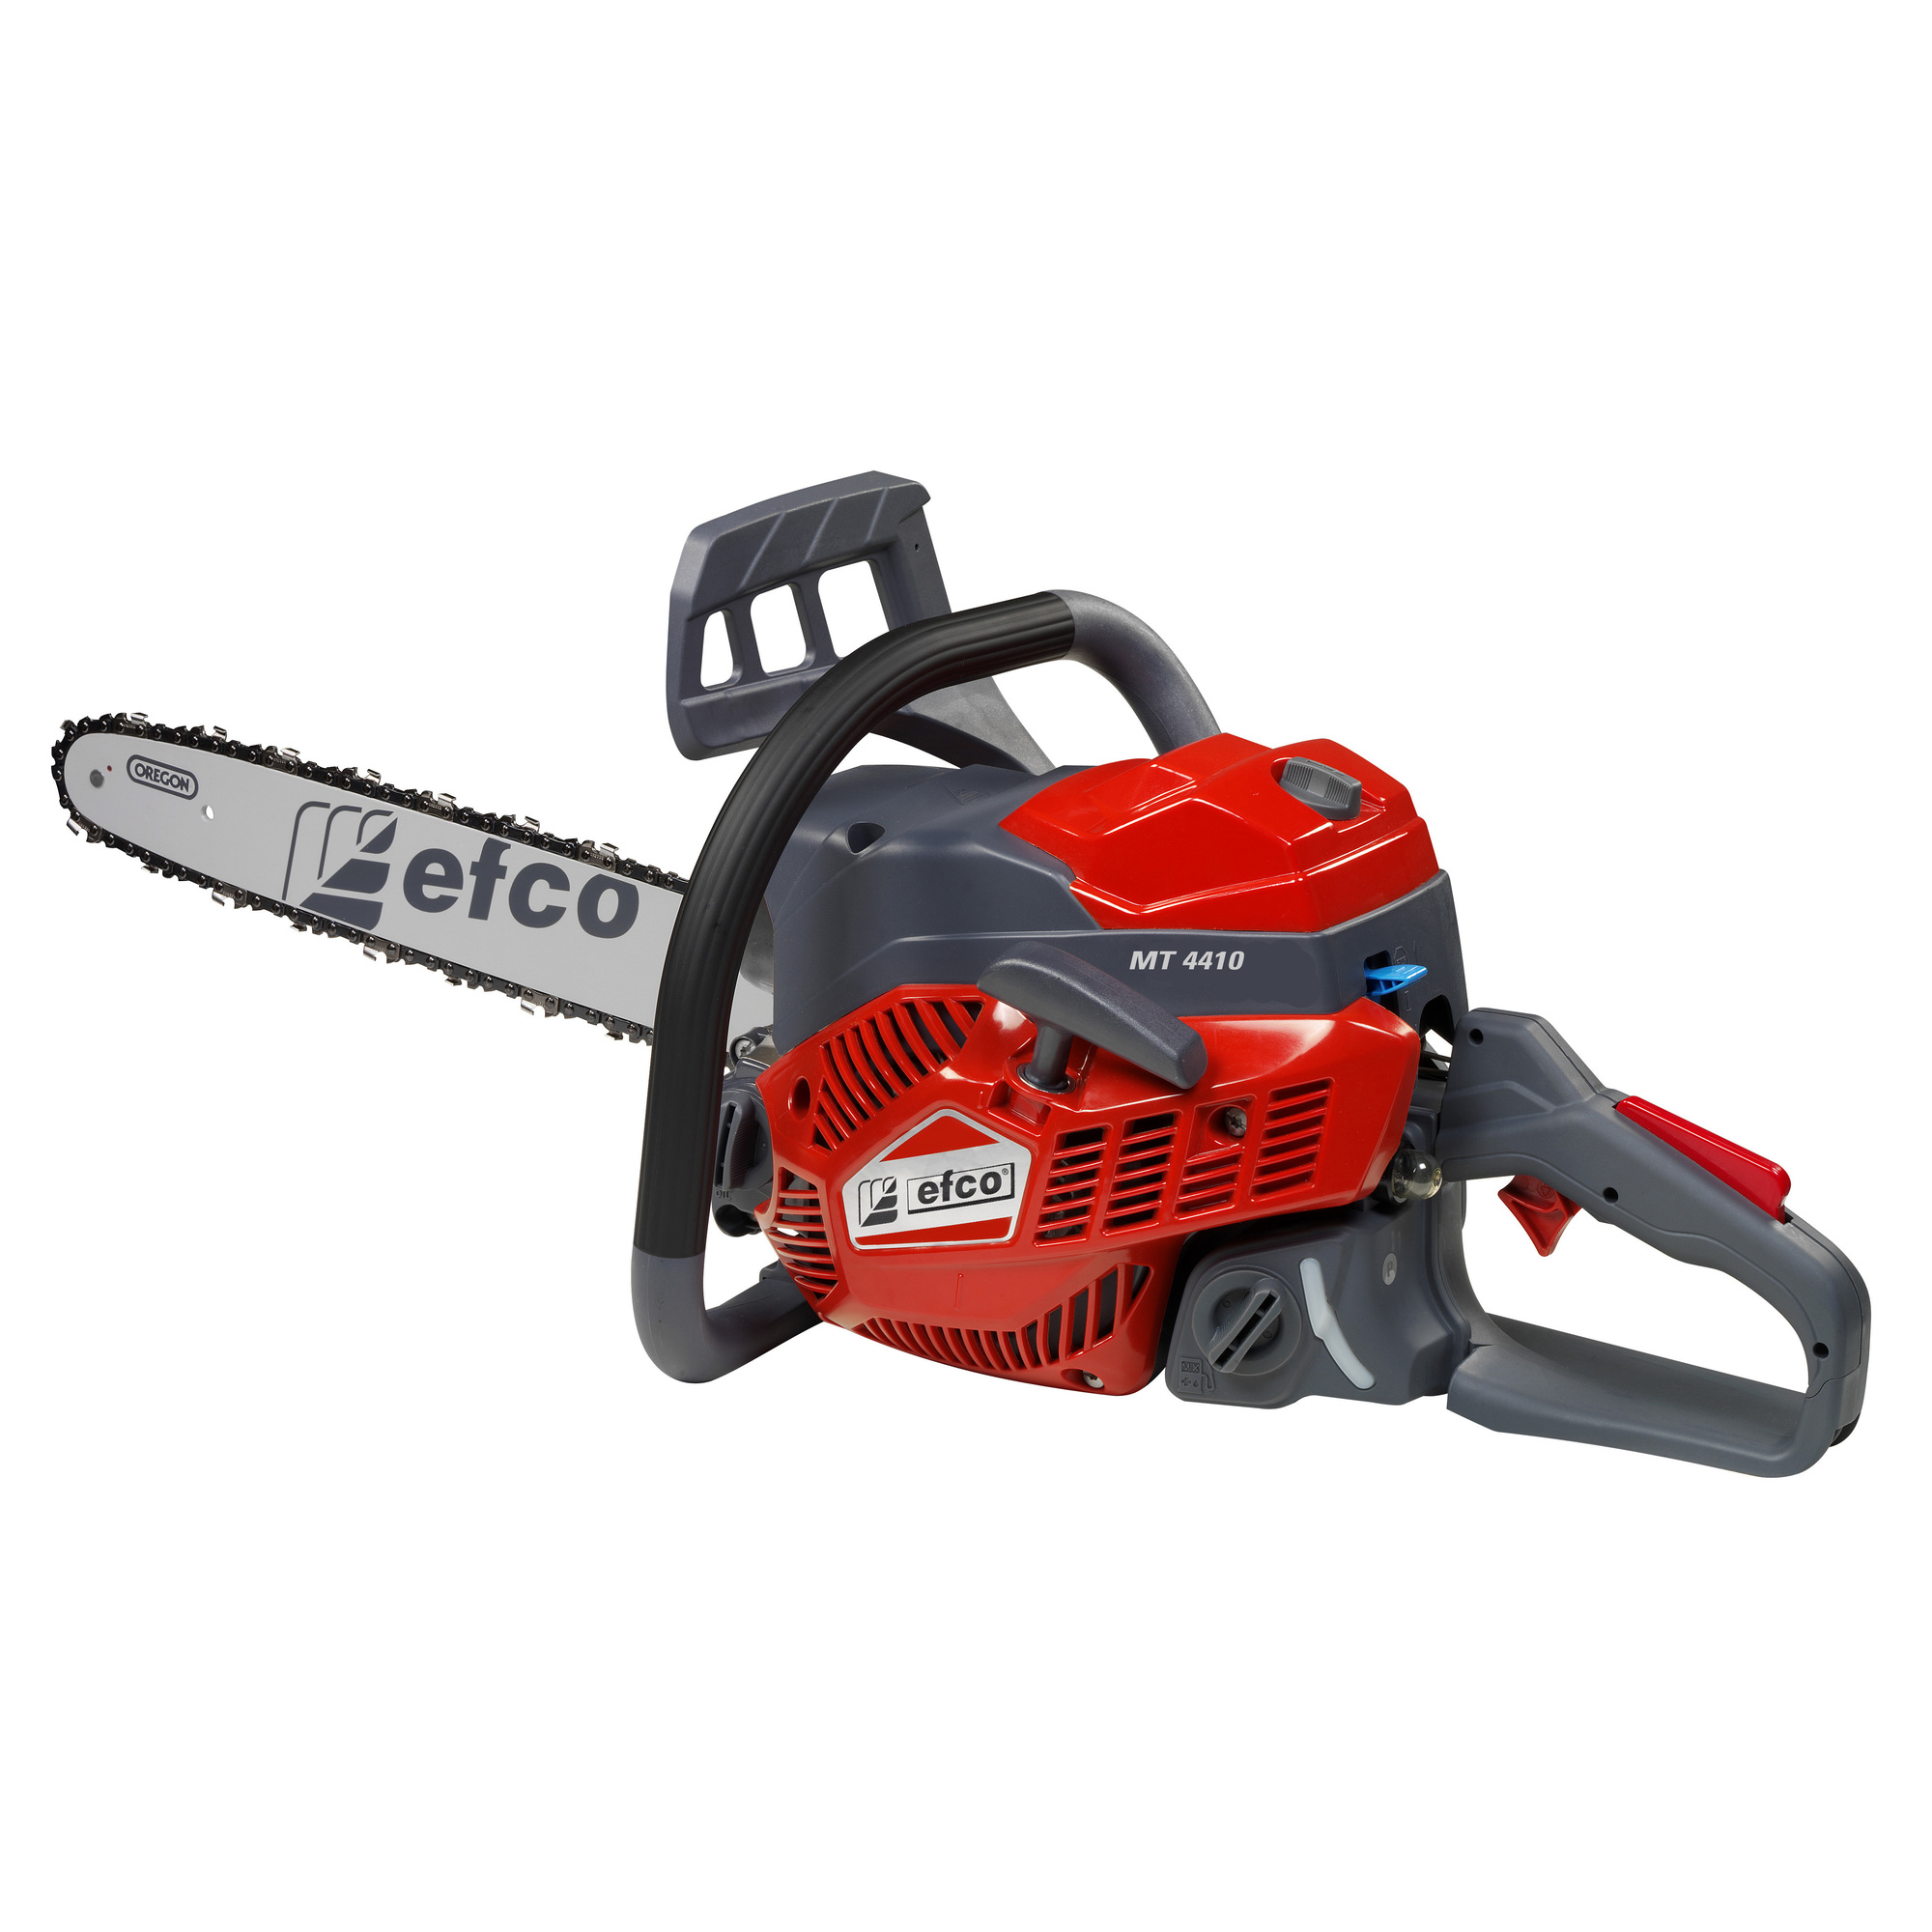 Efco, MT-Series Gas Chainsaw, Bar Length 16 in, Engine Displacement 42.9 cc, Model MT4410-16